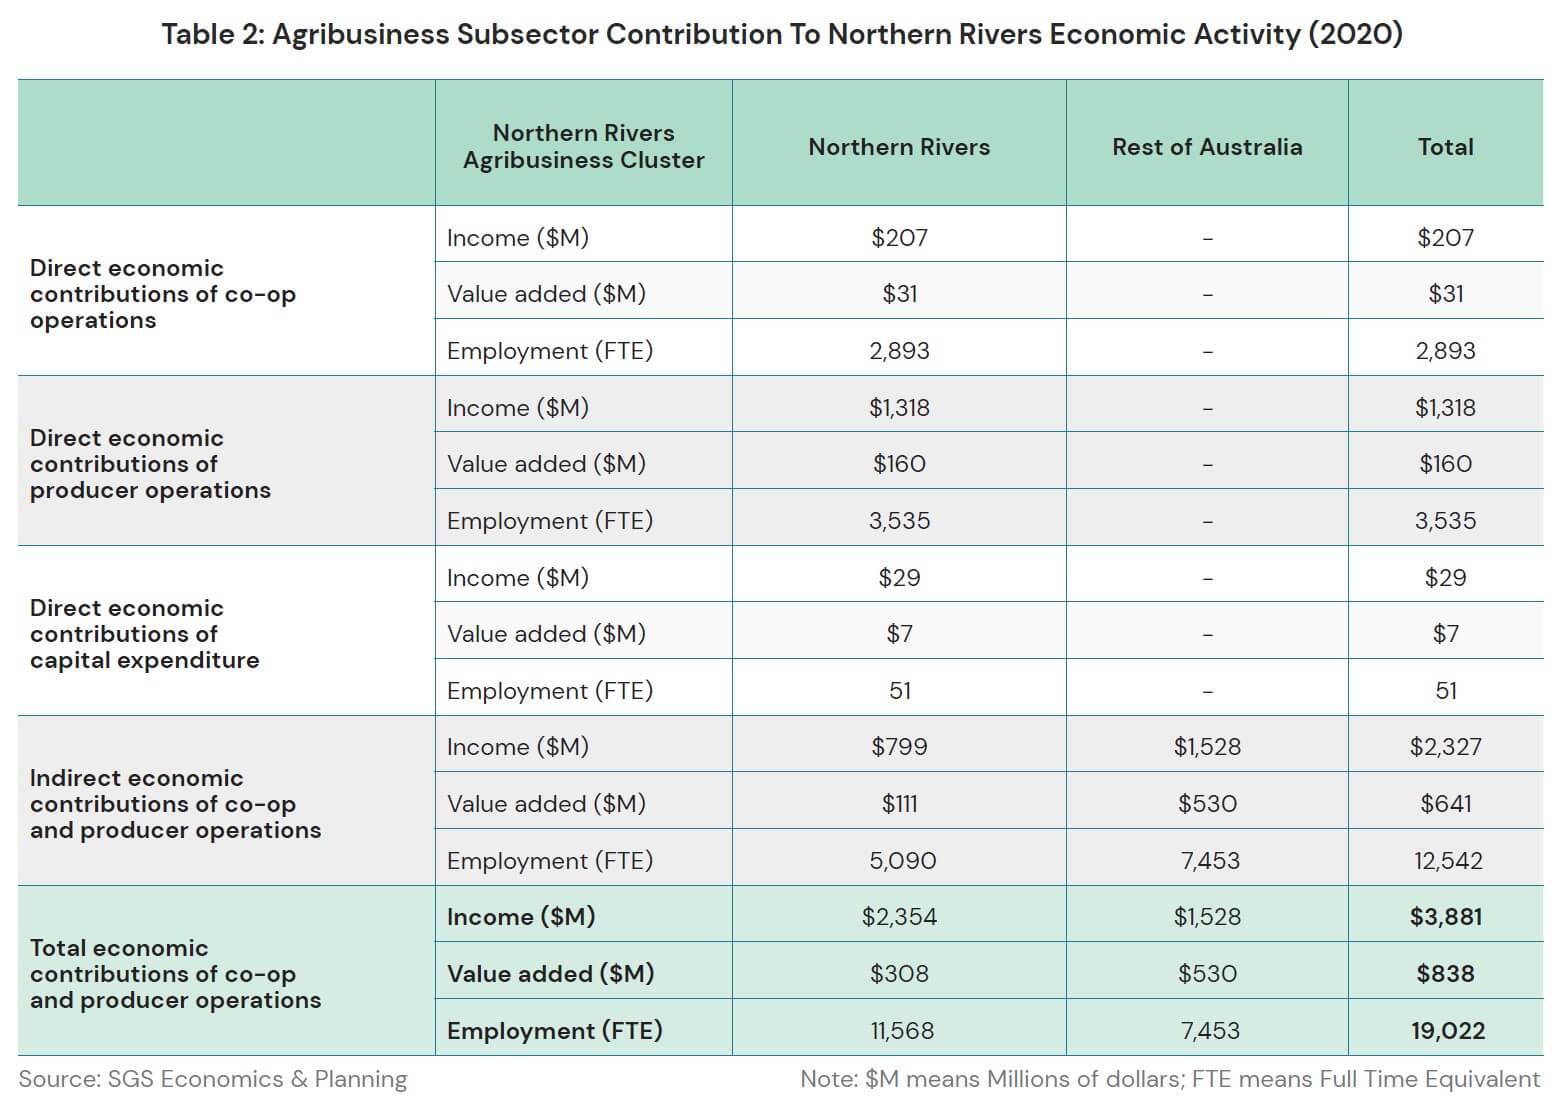 Agribusiness Subsector Contribution To Northern Rivers Economic Activity (2020)